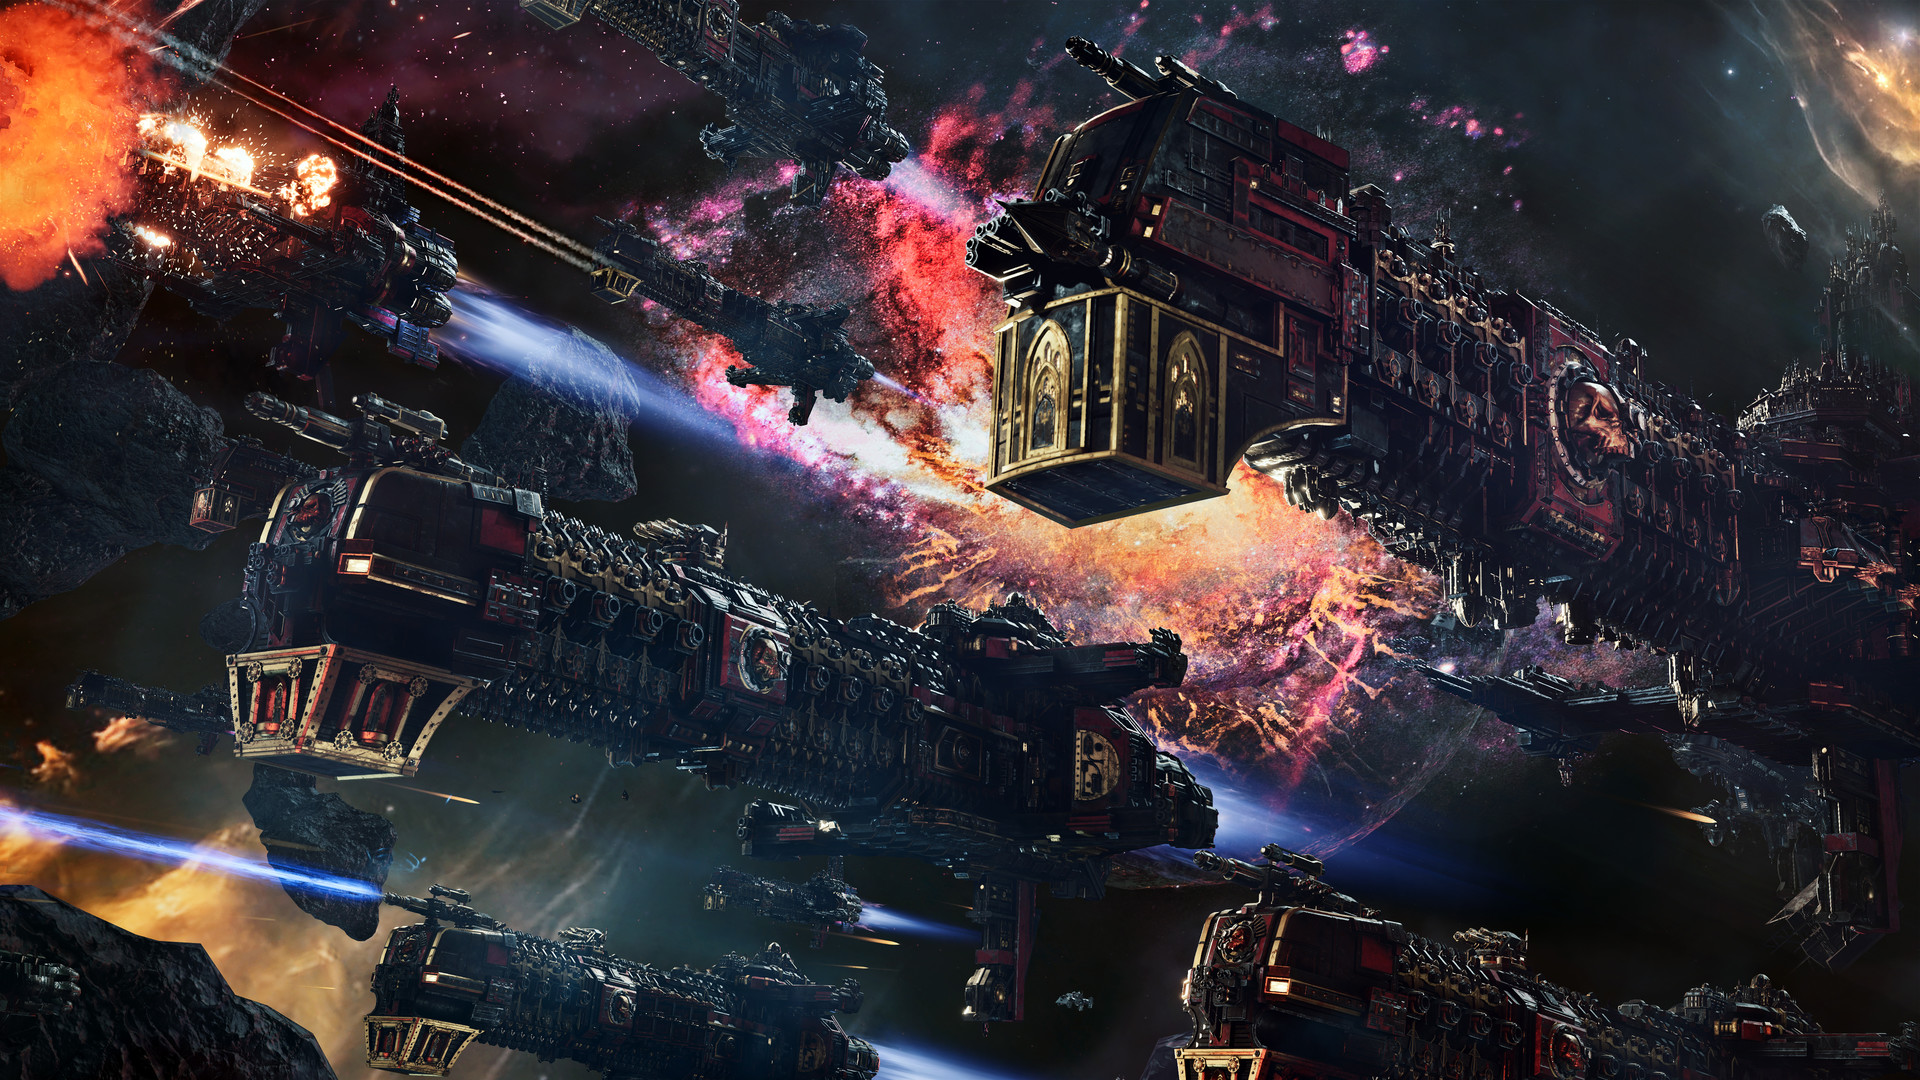 Cathedral-like spaceships shoot off their weapons.